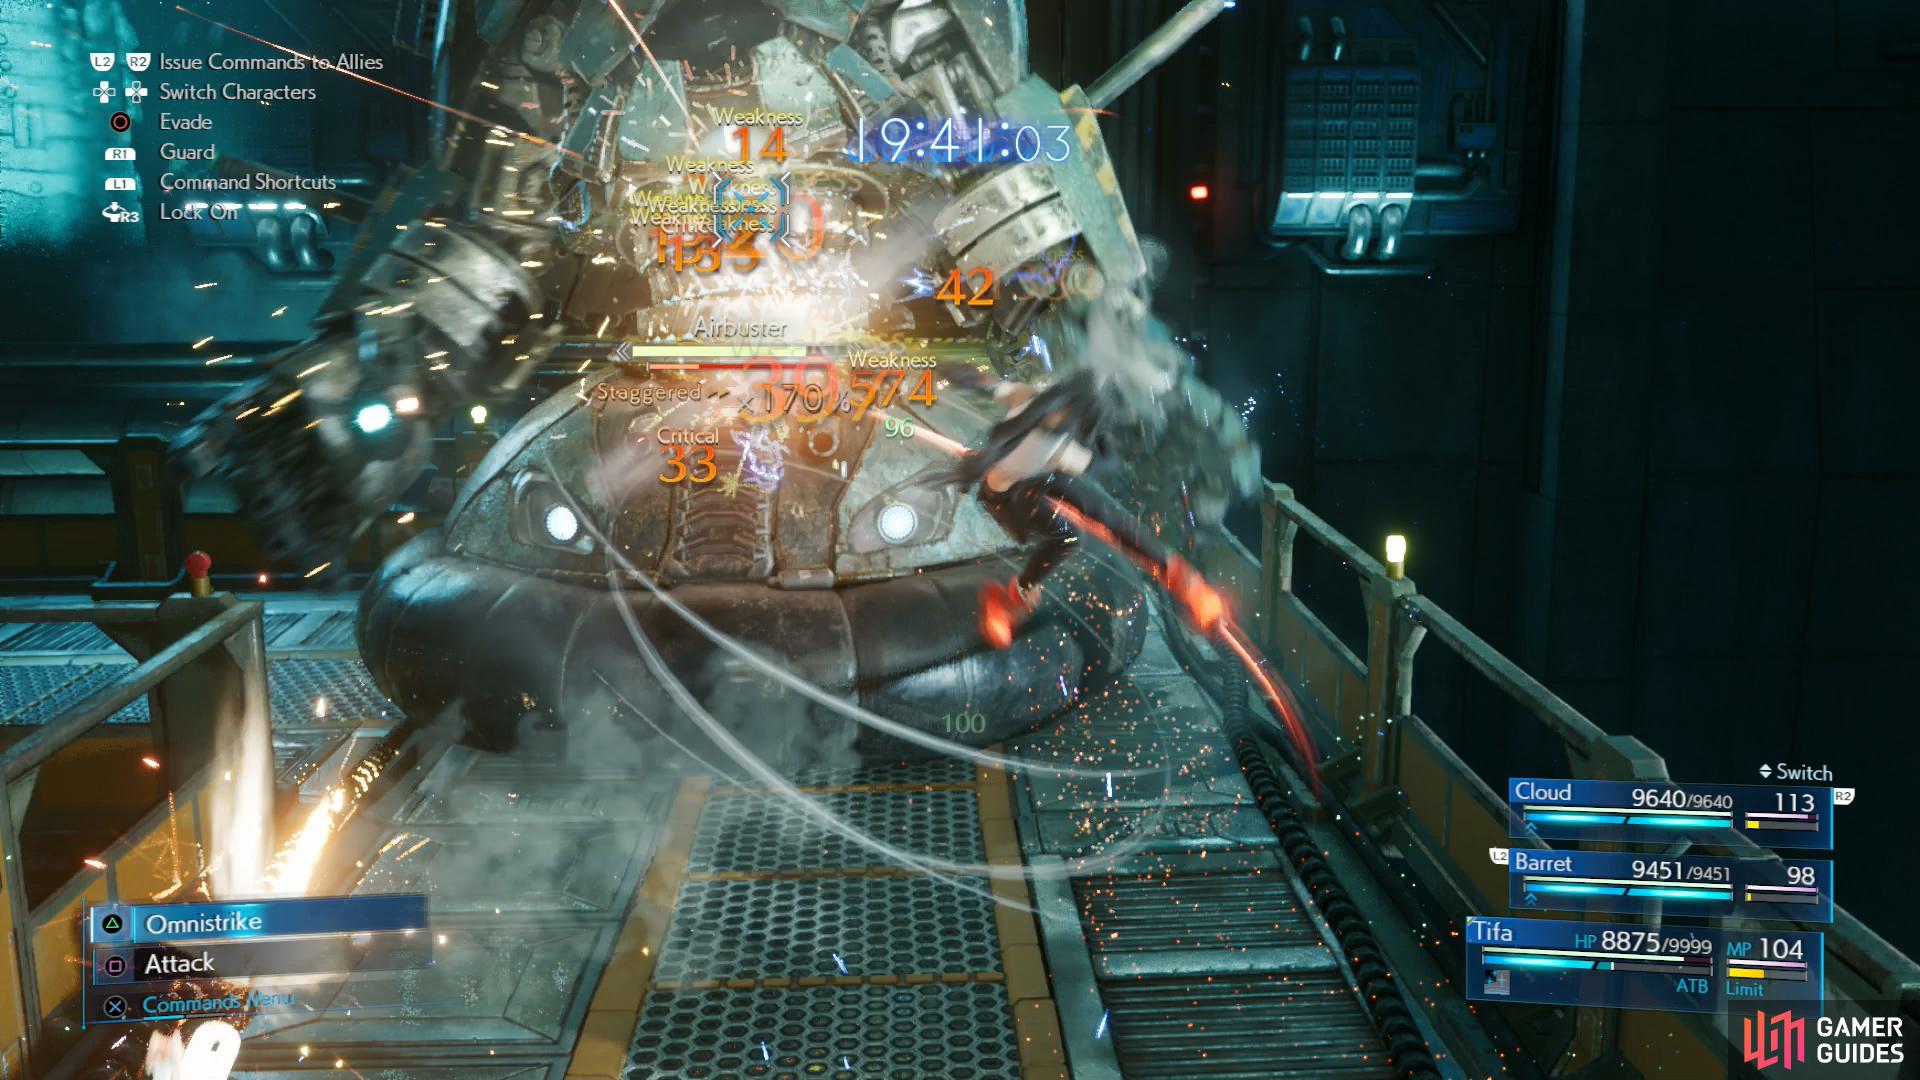 Tifa can inflict massive damage during a Stagger. Use her to send Airbuster to phase two.